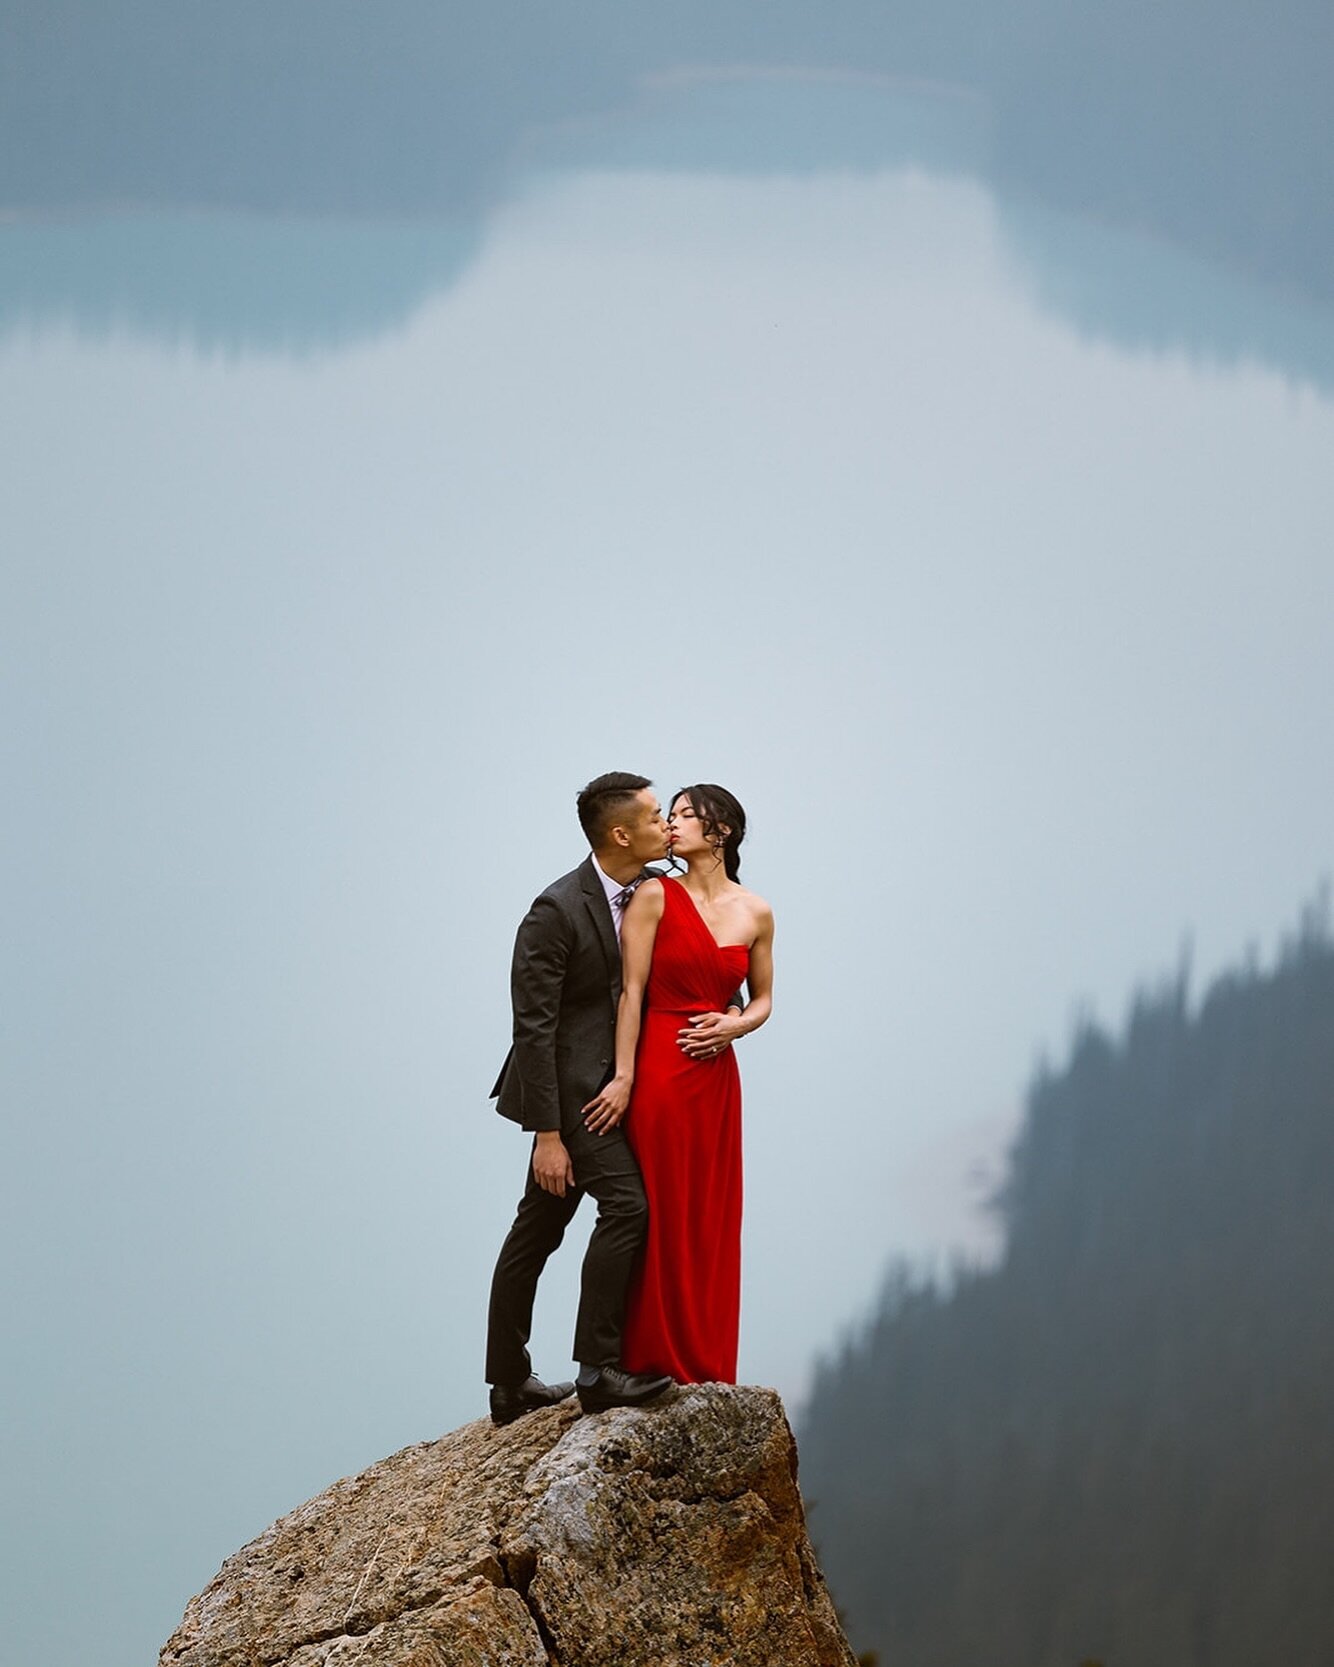 Mountain views engagement shoot 🏔️😍
Huge congrats to our couple V&amp;F! 💍

Btw, Happy Valentine&rsquo;s Day everyone! 🌹💝

Photography: @filmandforest 
Hair: @tdhairandmakeup 
Makeup: yours truly @lorrainemakeupartistry 

*
Luxury Mobile Beauty 